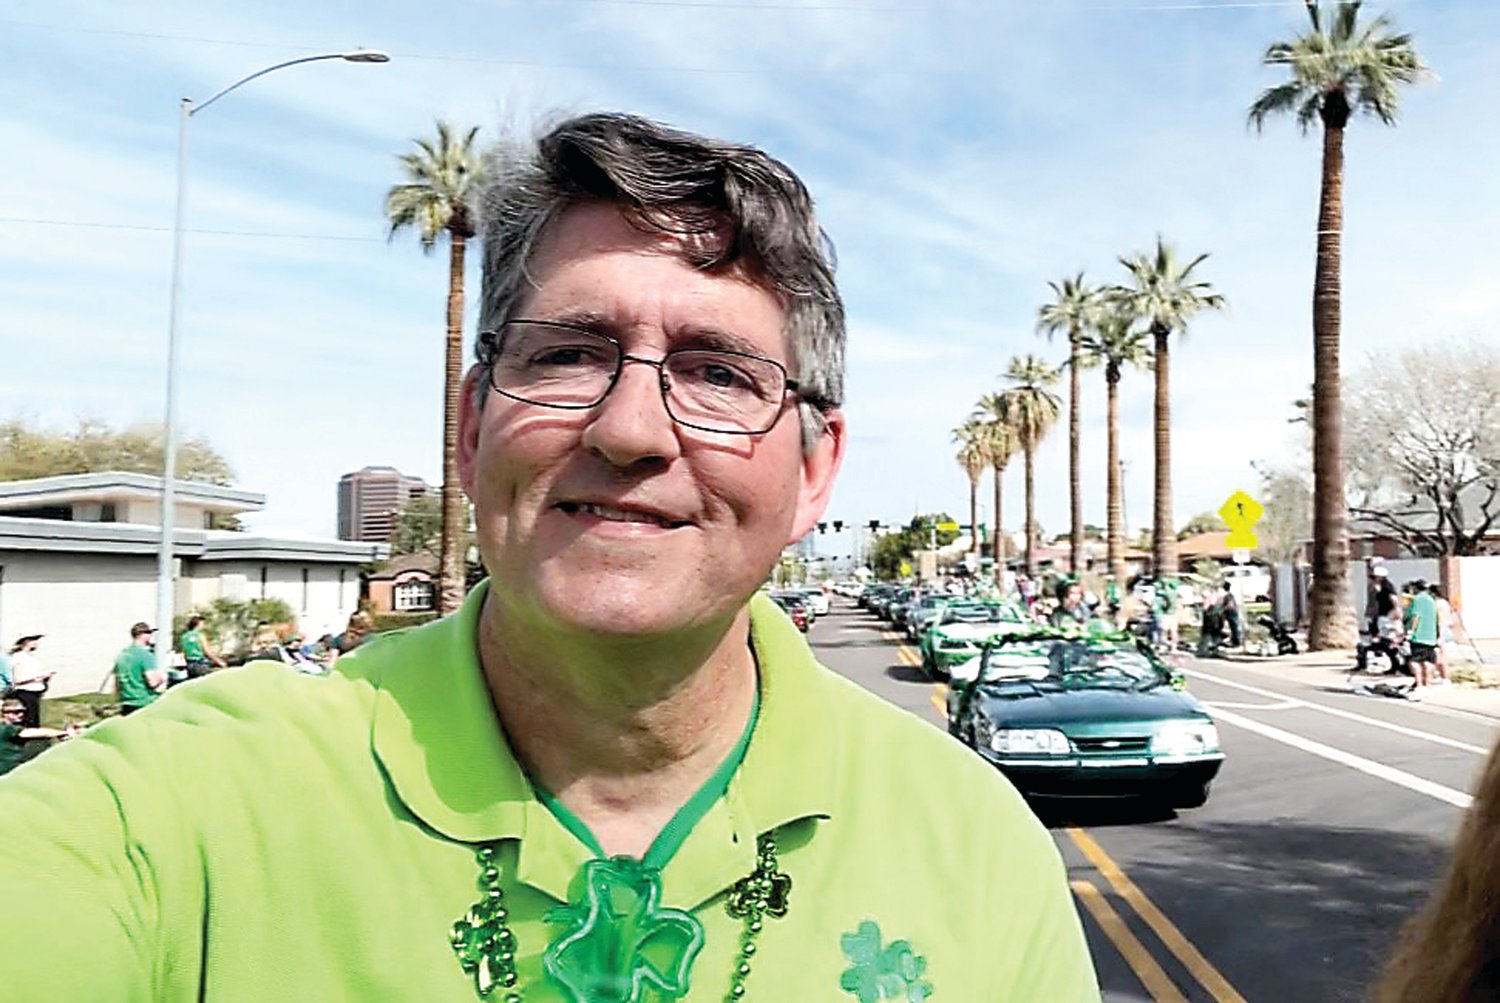 Last weekend Seán and Estelle Handy rode a Ford Mustang in the 40th annual St. Patrick’s Day Parade in Phoenix, Ariz. They support learning the Irish language across the United States, in Ireland and wherever the Irish diaspora can be found.